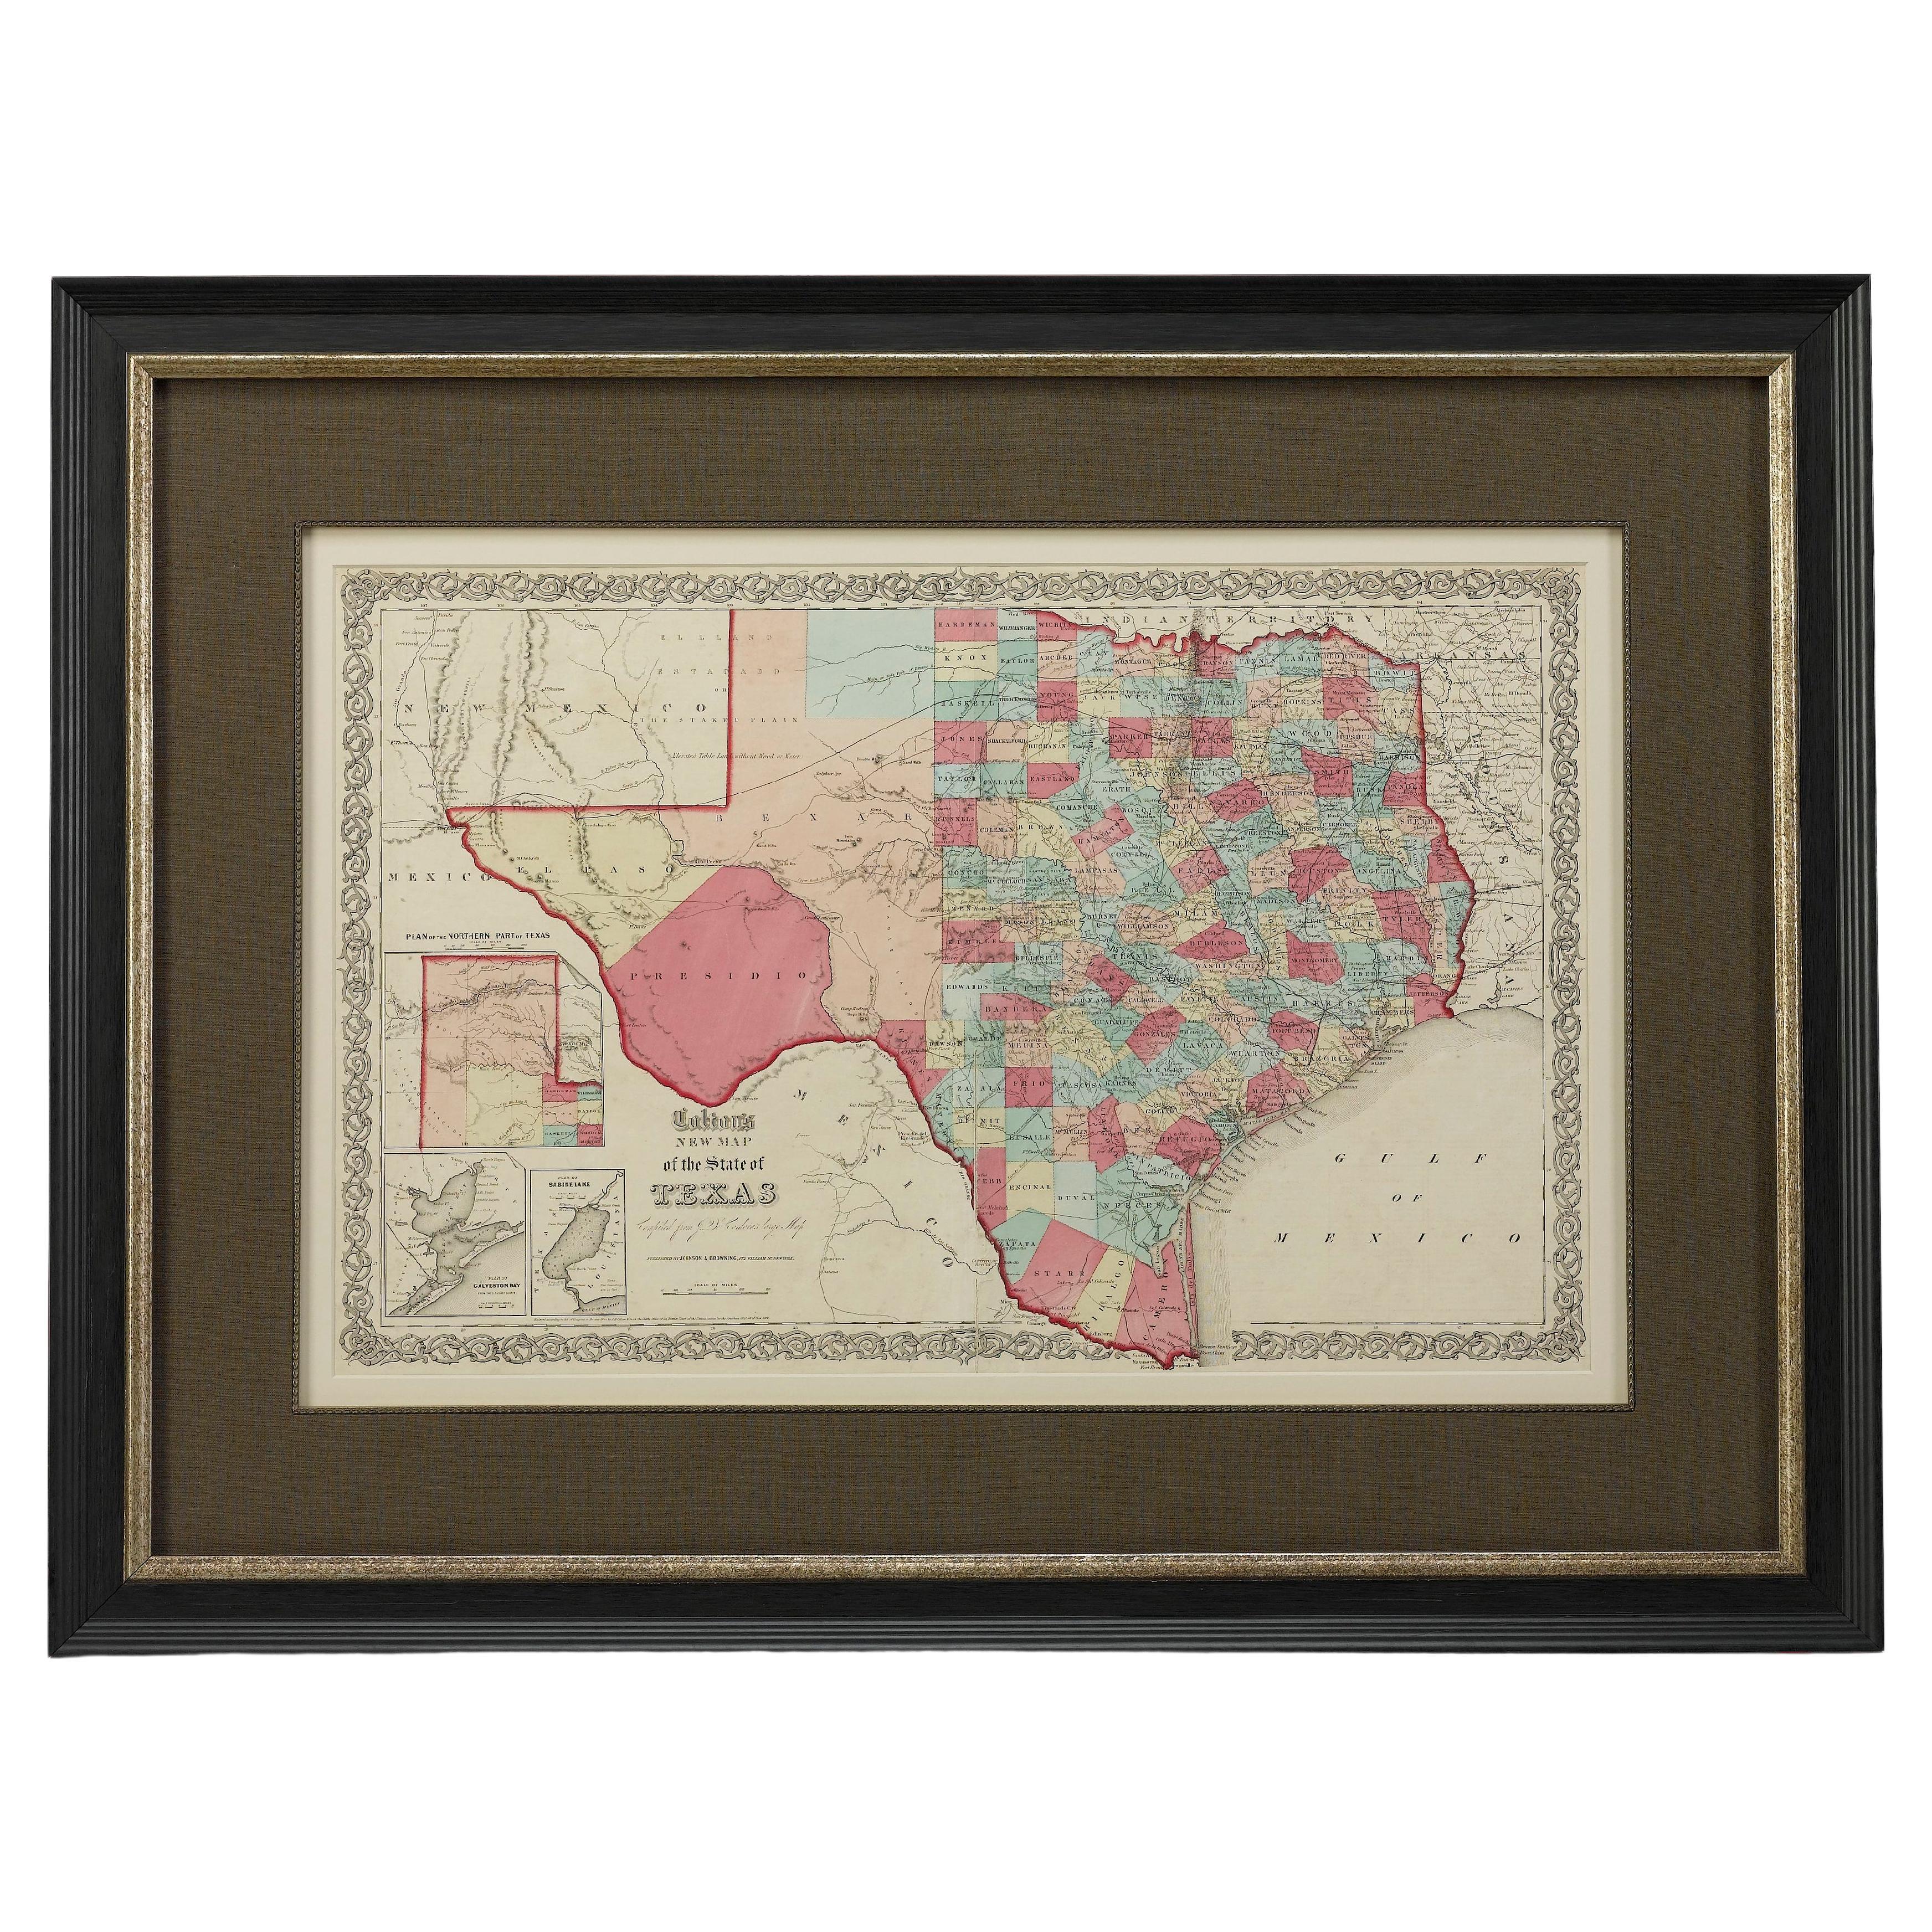 1859 "Colton's New Map of the State of Texas..." by Johnson & Browning